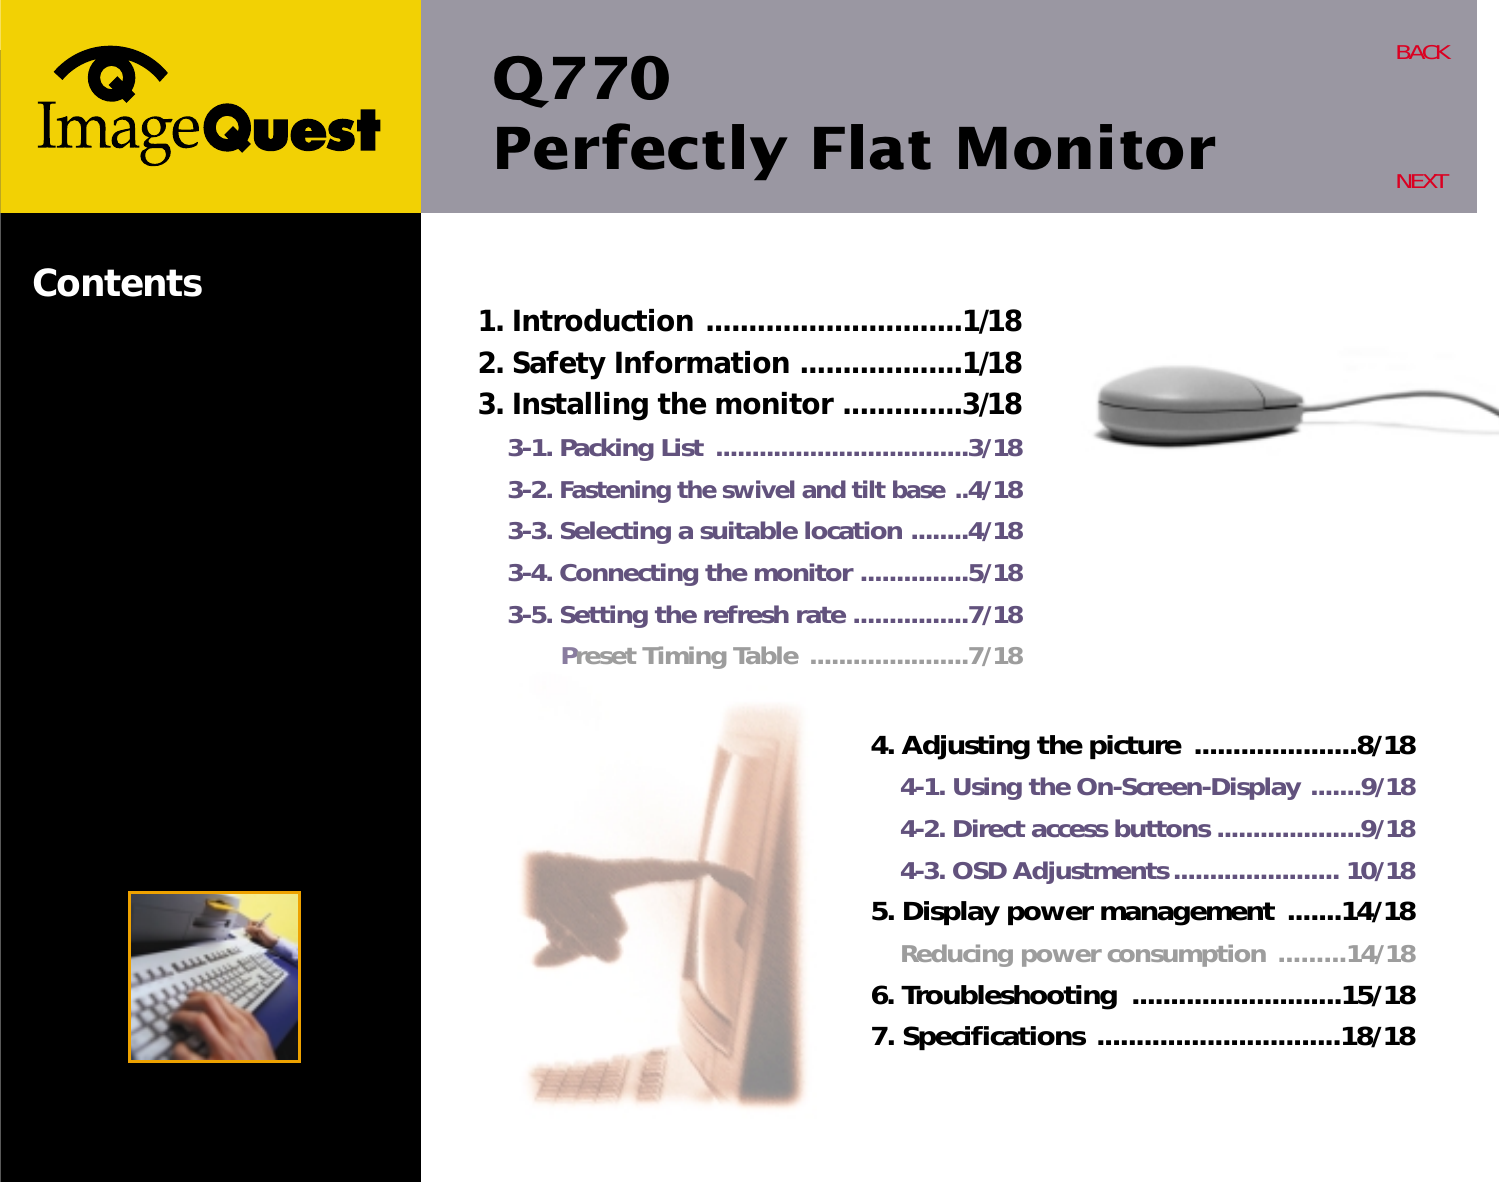 Q770Perfectly Flat Monitor  BACKNEXTContents 1. Introduction ..............................1/182. Safety Information ...................1/183. Installing the monitor ..............3/183-1. Packing List  ...................................3/183-2. Fastening the swivel and tilt base ..4/183-3. Selecting a suitable location ........4/183-4. Connecting the monitor ...............5/183-5. Setting the refresh rate ................7/18Preset Timing Table ......................7/184. Adjusting the picture .....................8/184-1. Using the On-Screen-Display .......9/184-2. Direct access buttons ....................9/184-3. OSD Adjustments ....................... 10/185. Display power management .......14/18Reducing power consumption .........14/186. Troubleshooting  ...........................15/187. Specifications ...............................18/18